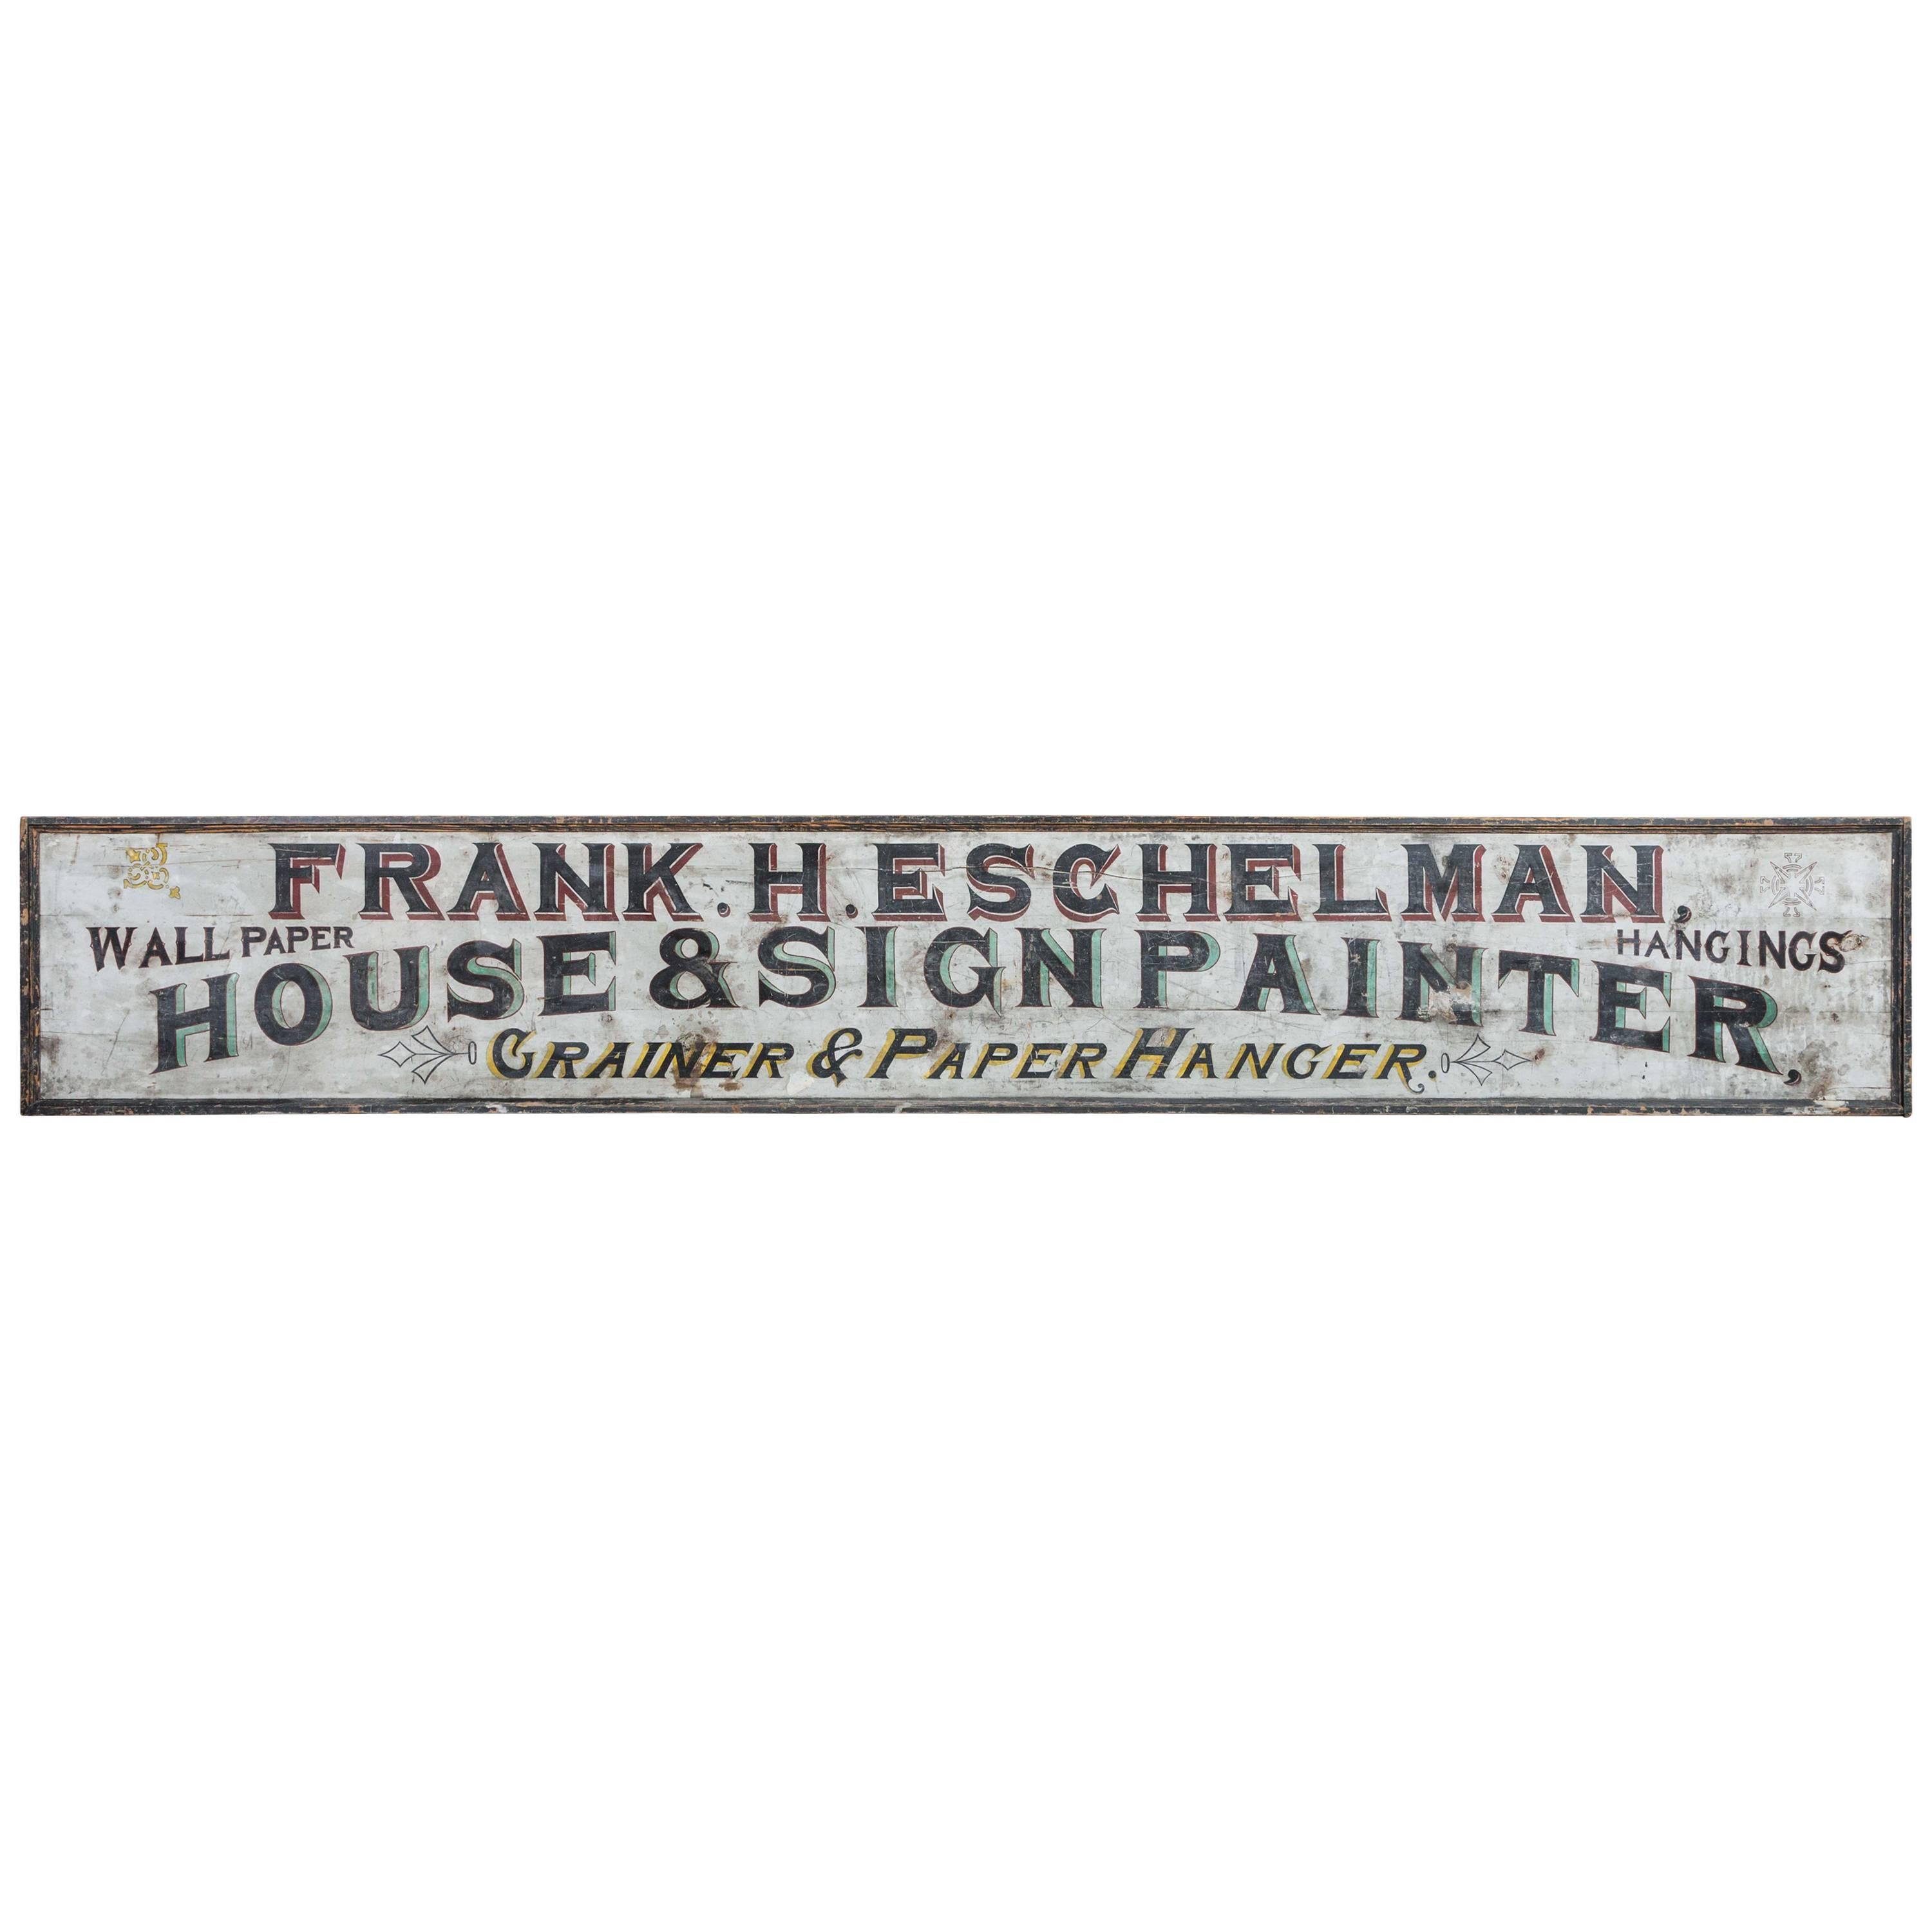 Late 19th Century "House & Sign Painter" Trade Sign